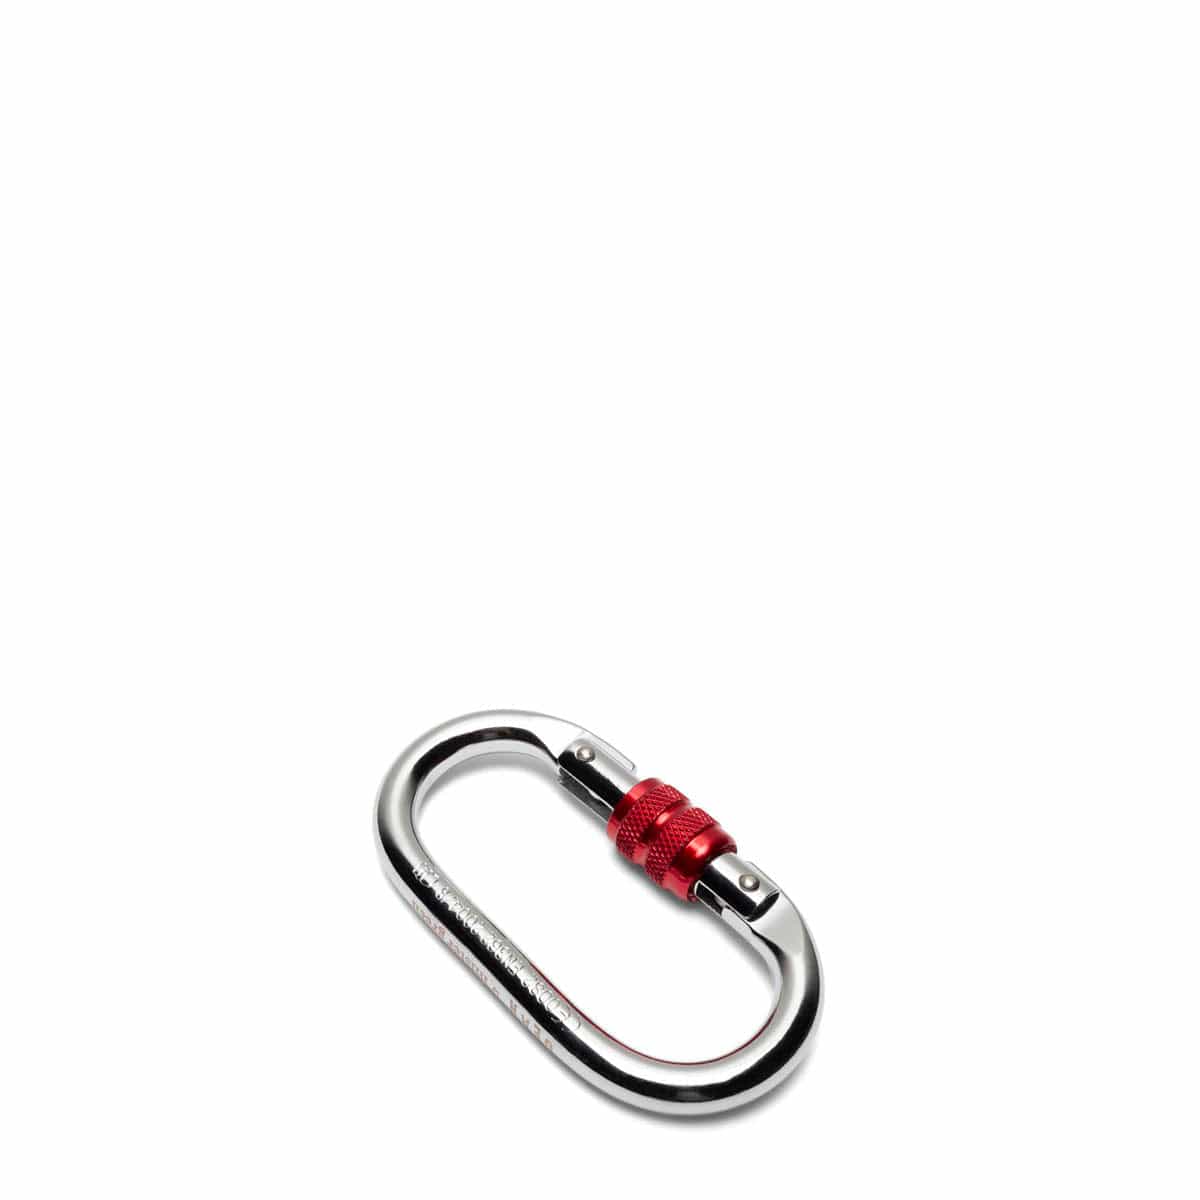 Mister Green Odds & Ends SILVER / O/S CLIMBING CARABINER